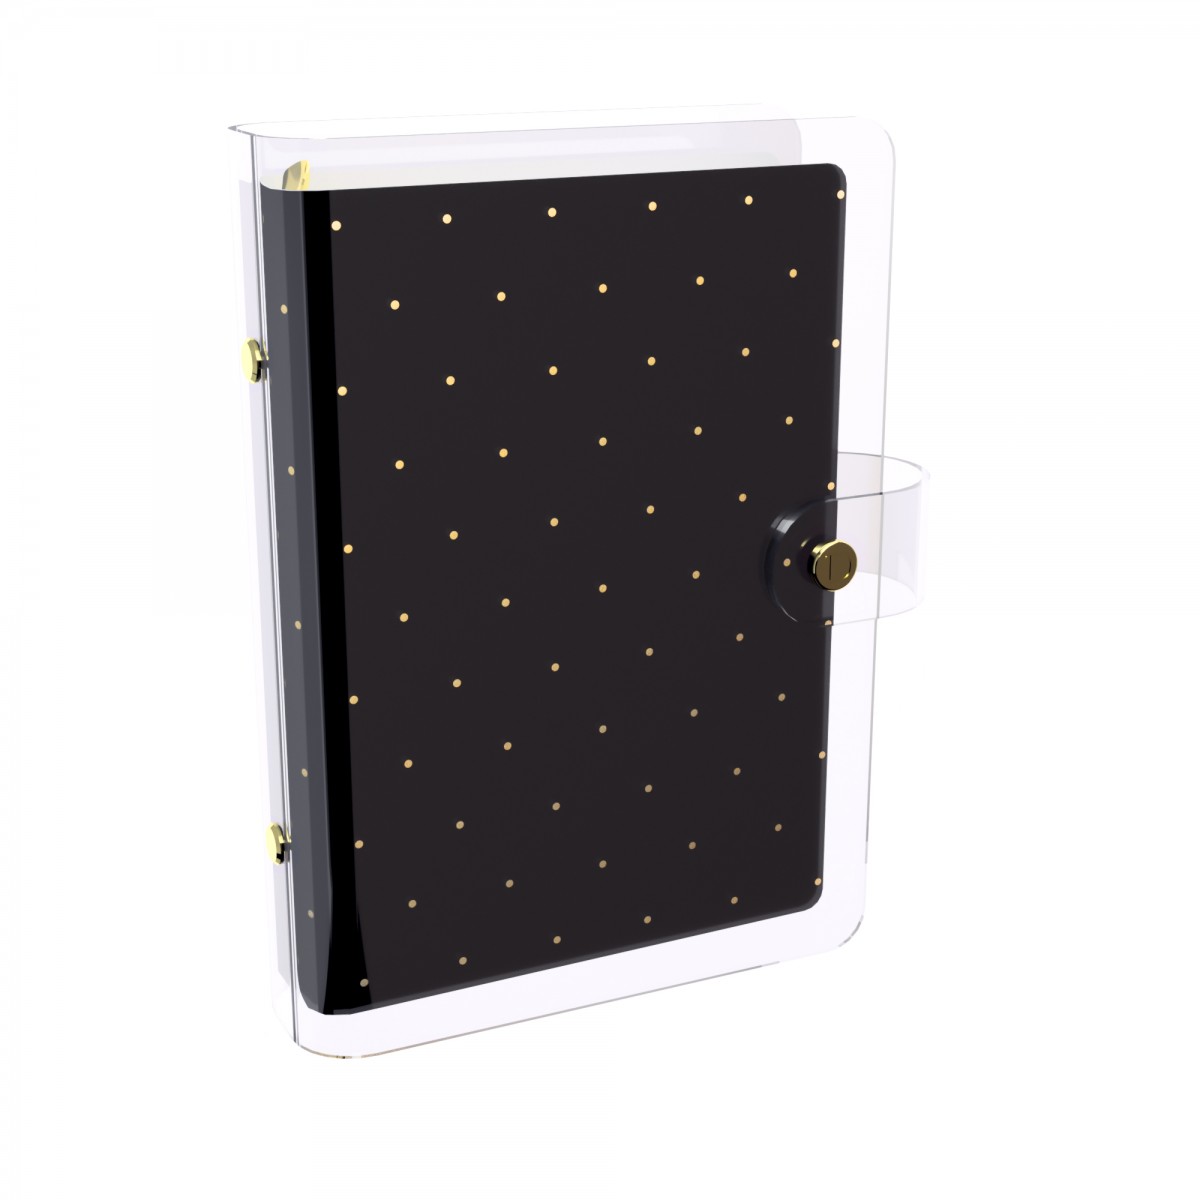 DISCAGENDA CLARITY CLEAR PVC PLANNER COVER - BLACK WITH GOLD POLKA DOTS, RINGBOUND, PERSONAL SIZE